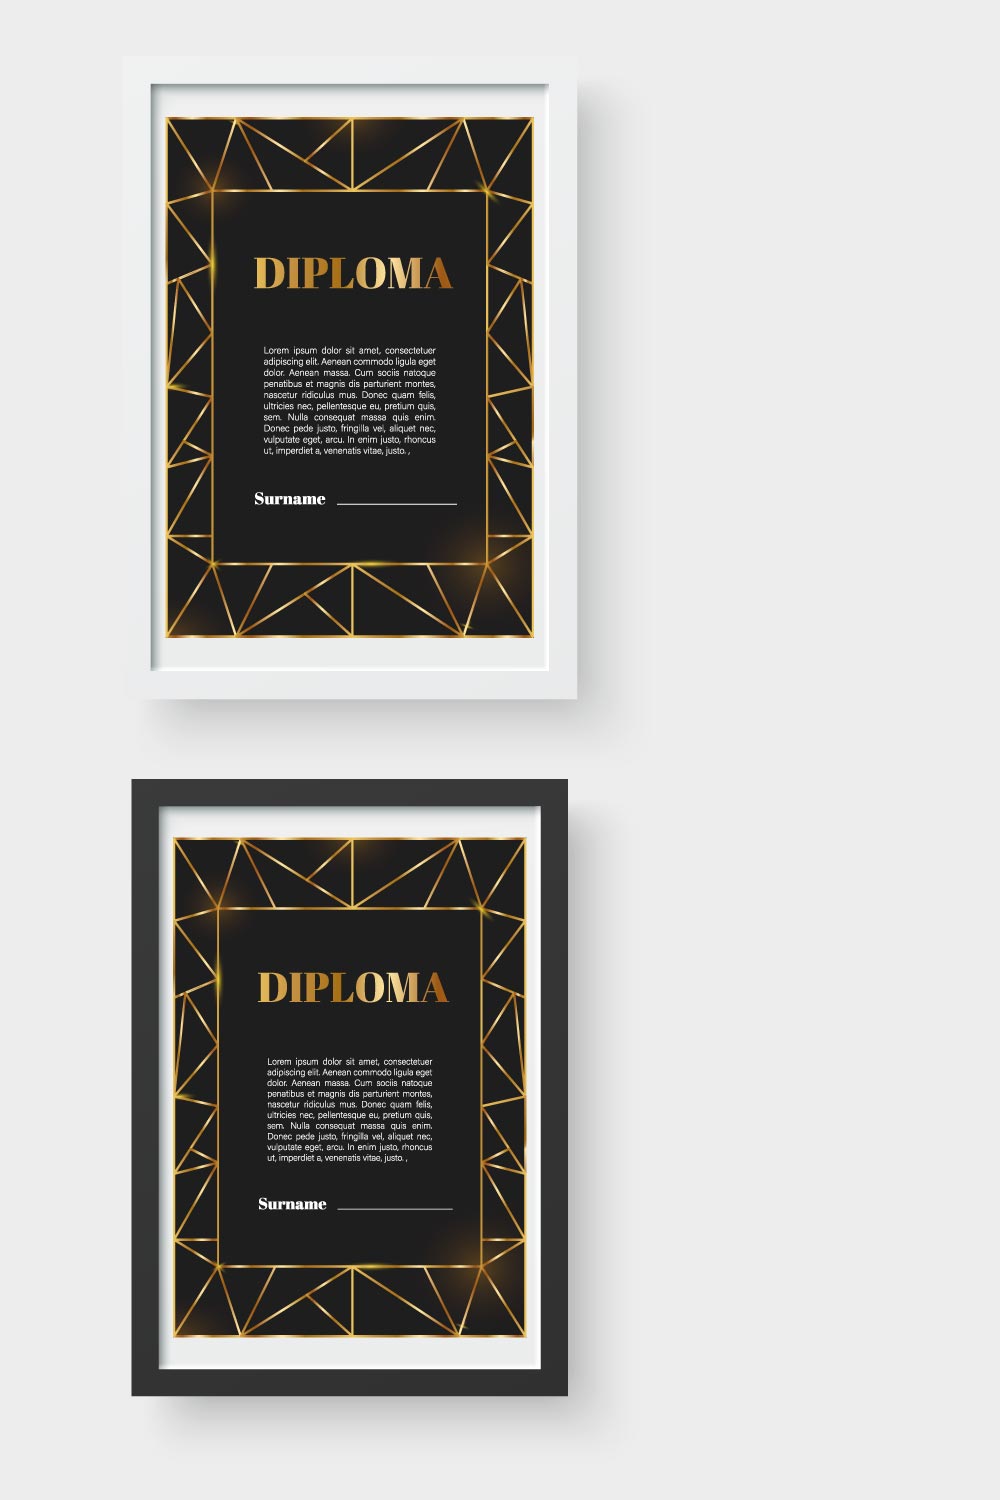 Certificate or diploma template on black background pinterest preview image.